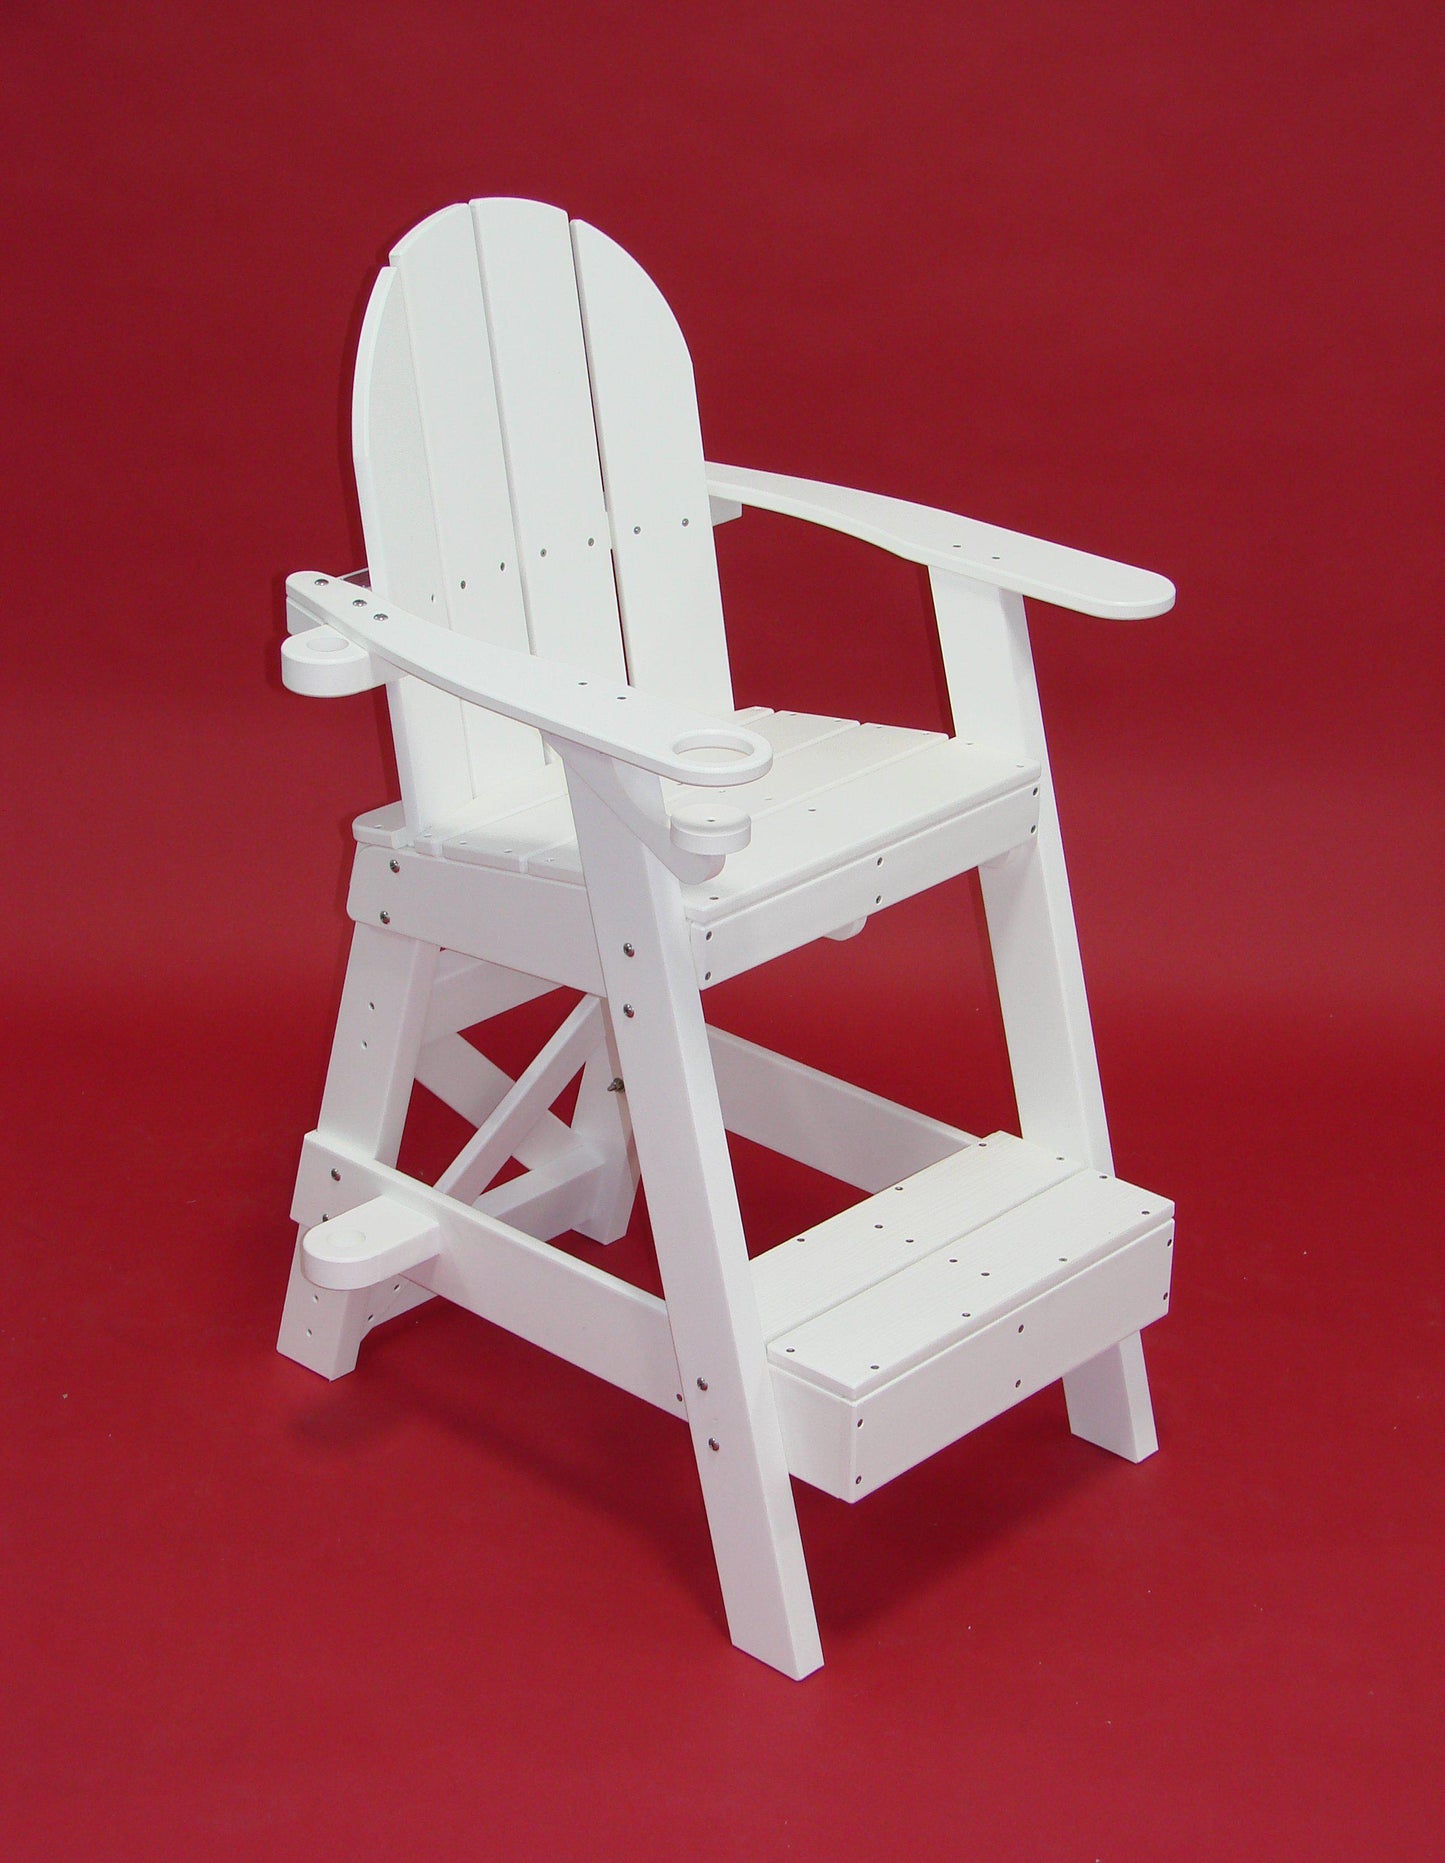 Tailwind Furniture Recycled Plastic Small Lifeguard Chair - LG-505 - Seat Height 30" - LEAD TIME TO SHIP 10 TO 12 BUSINESS DAYS